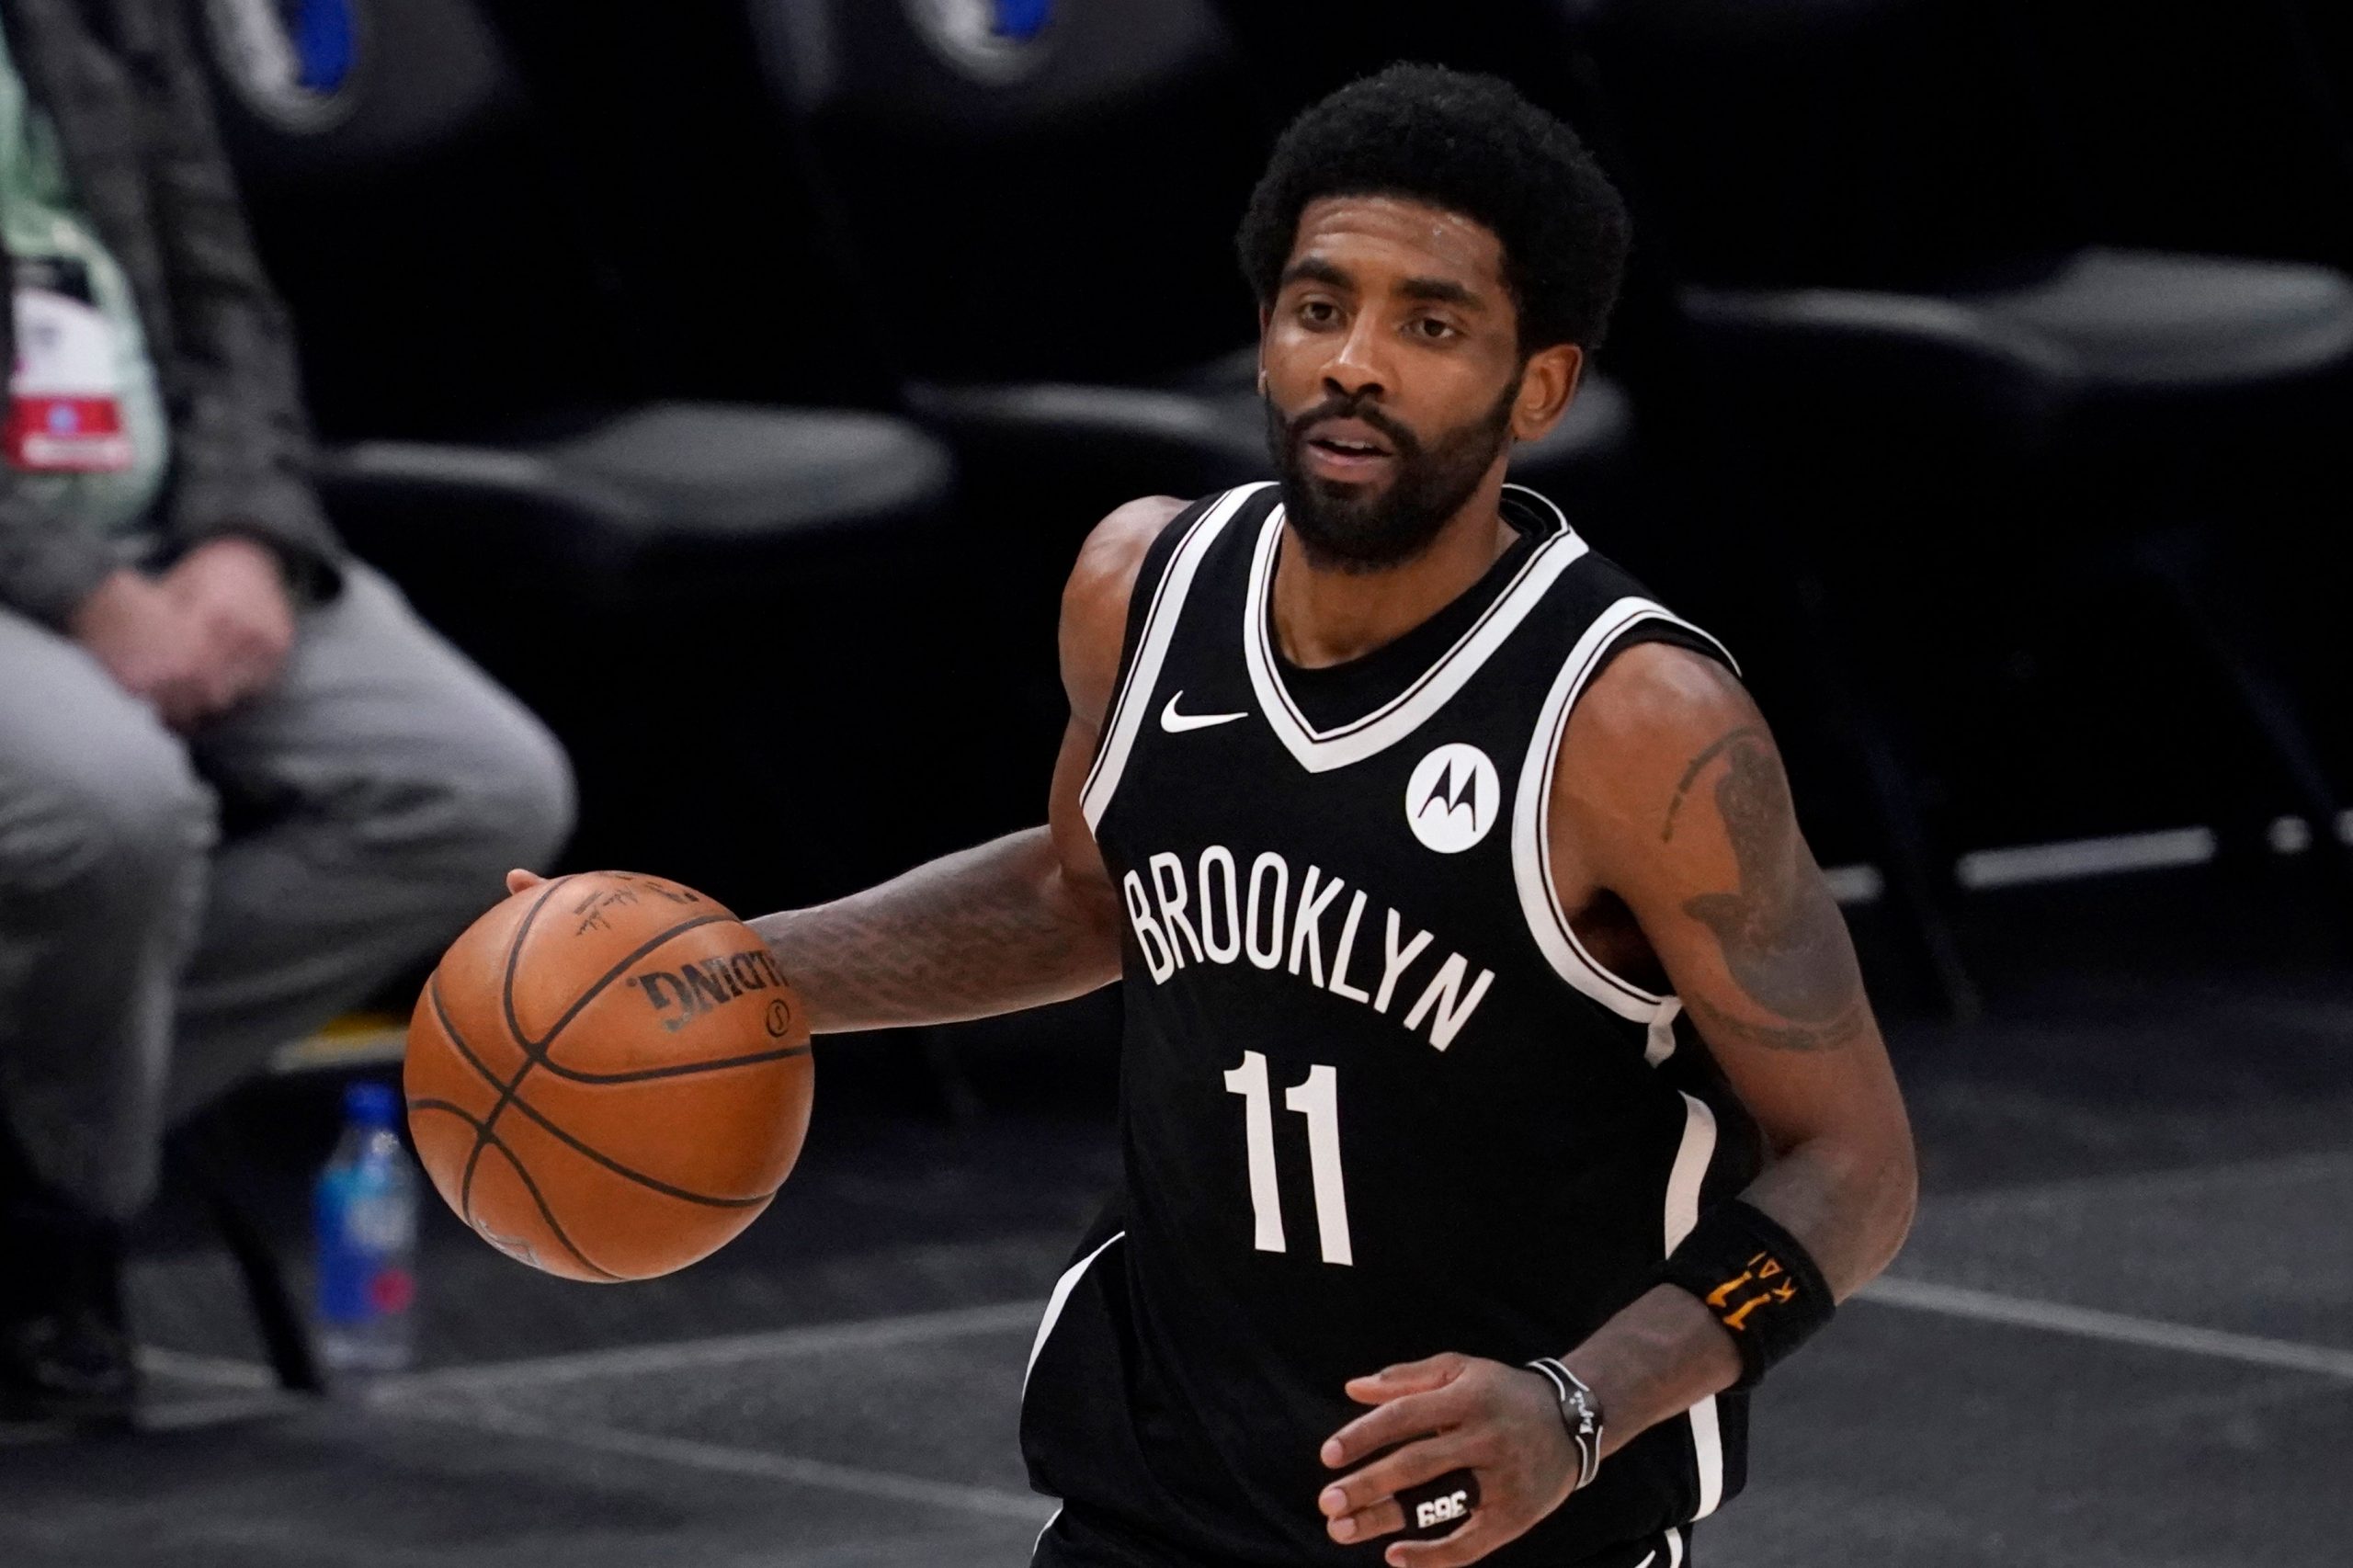 Brooklyn Nets’ Kyrie Irving benched until he gets COVID vaccine: Team